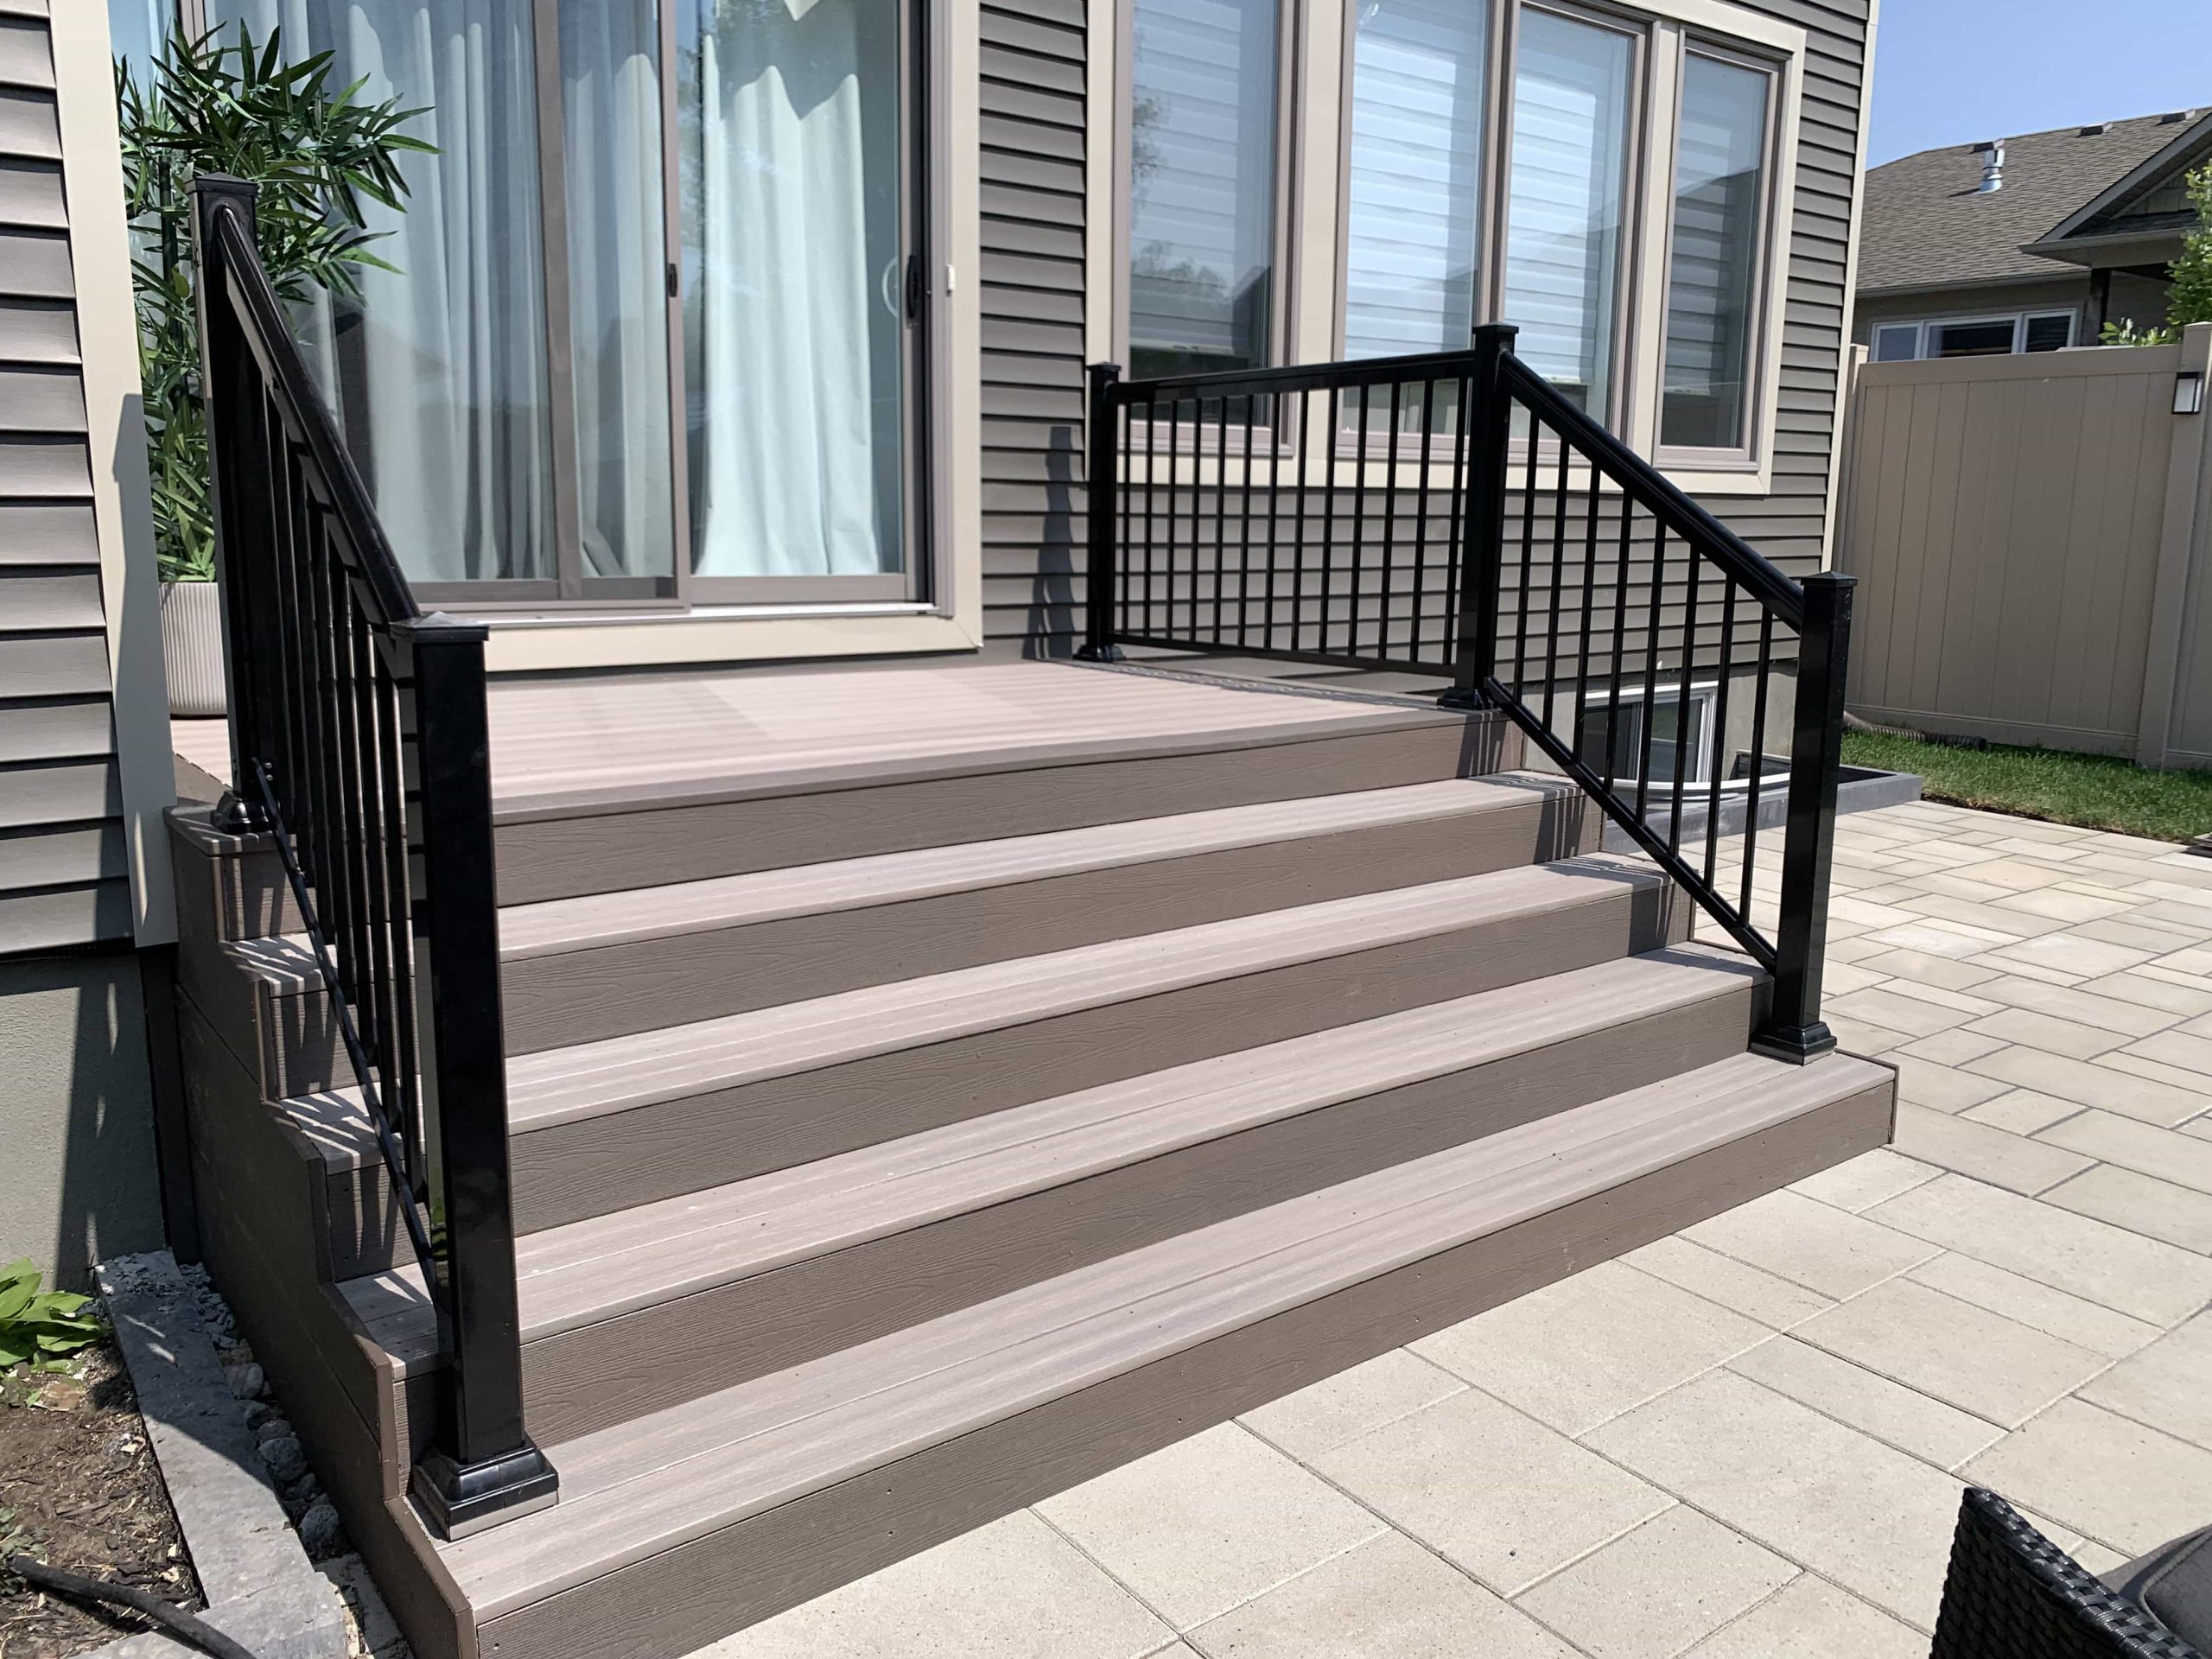 A newly installed deck with elegant railings enhances a residential backyard, highlighting the precise workmanship and contemporary design that adds to the home's outdoor appeal